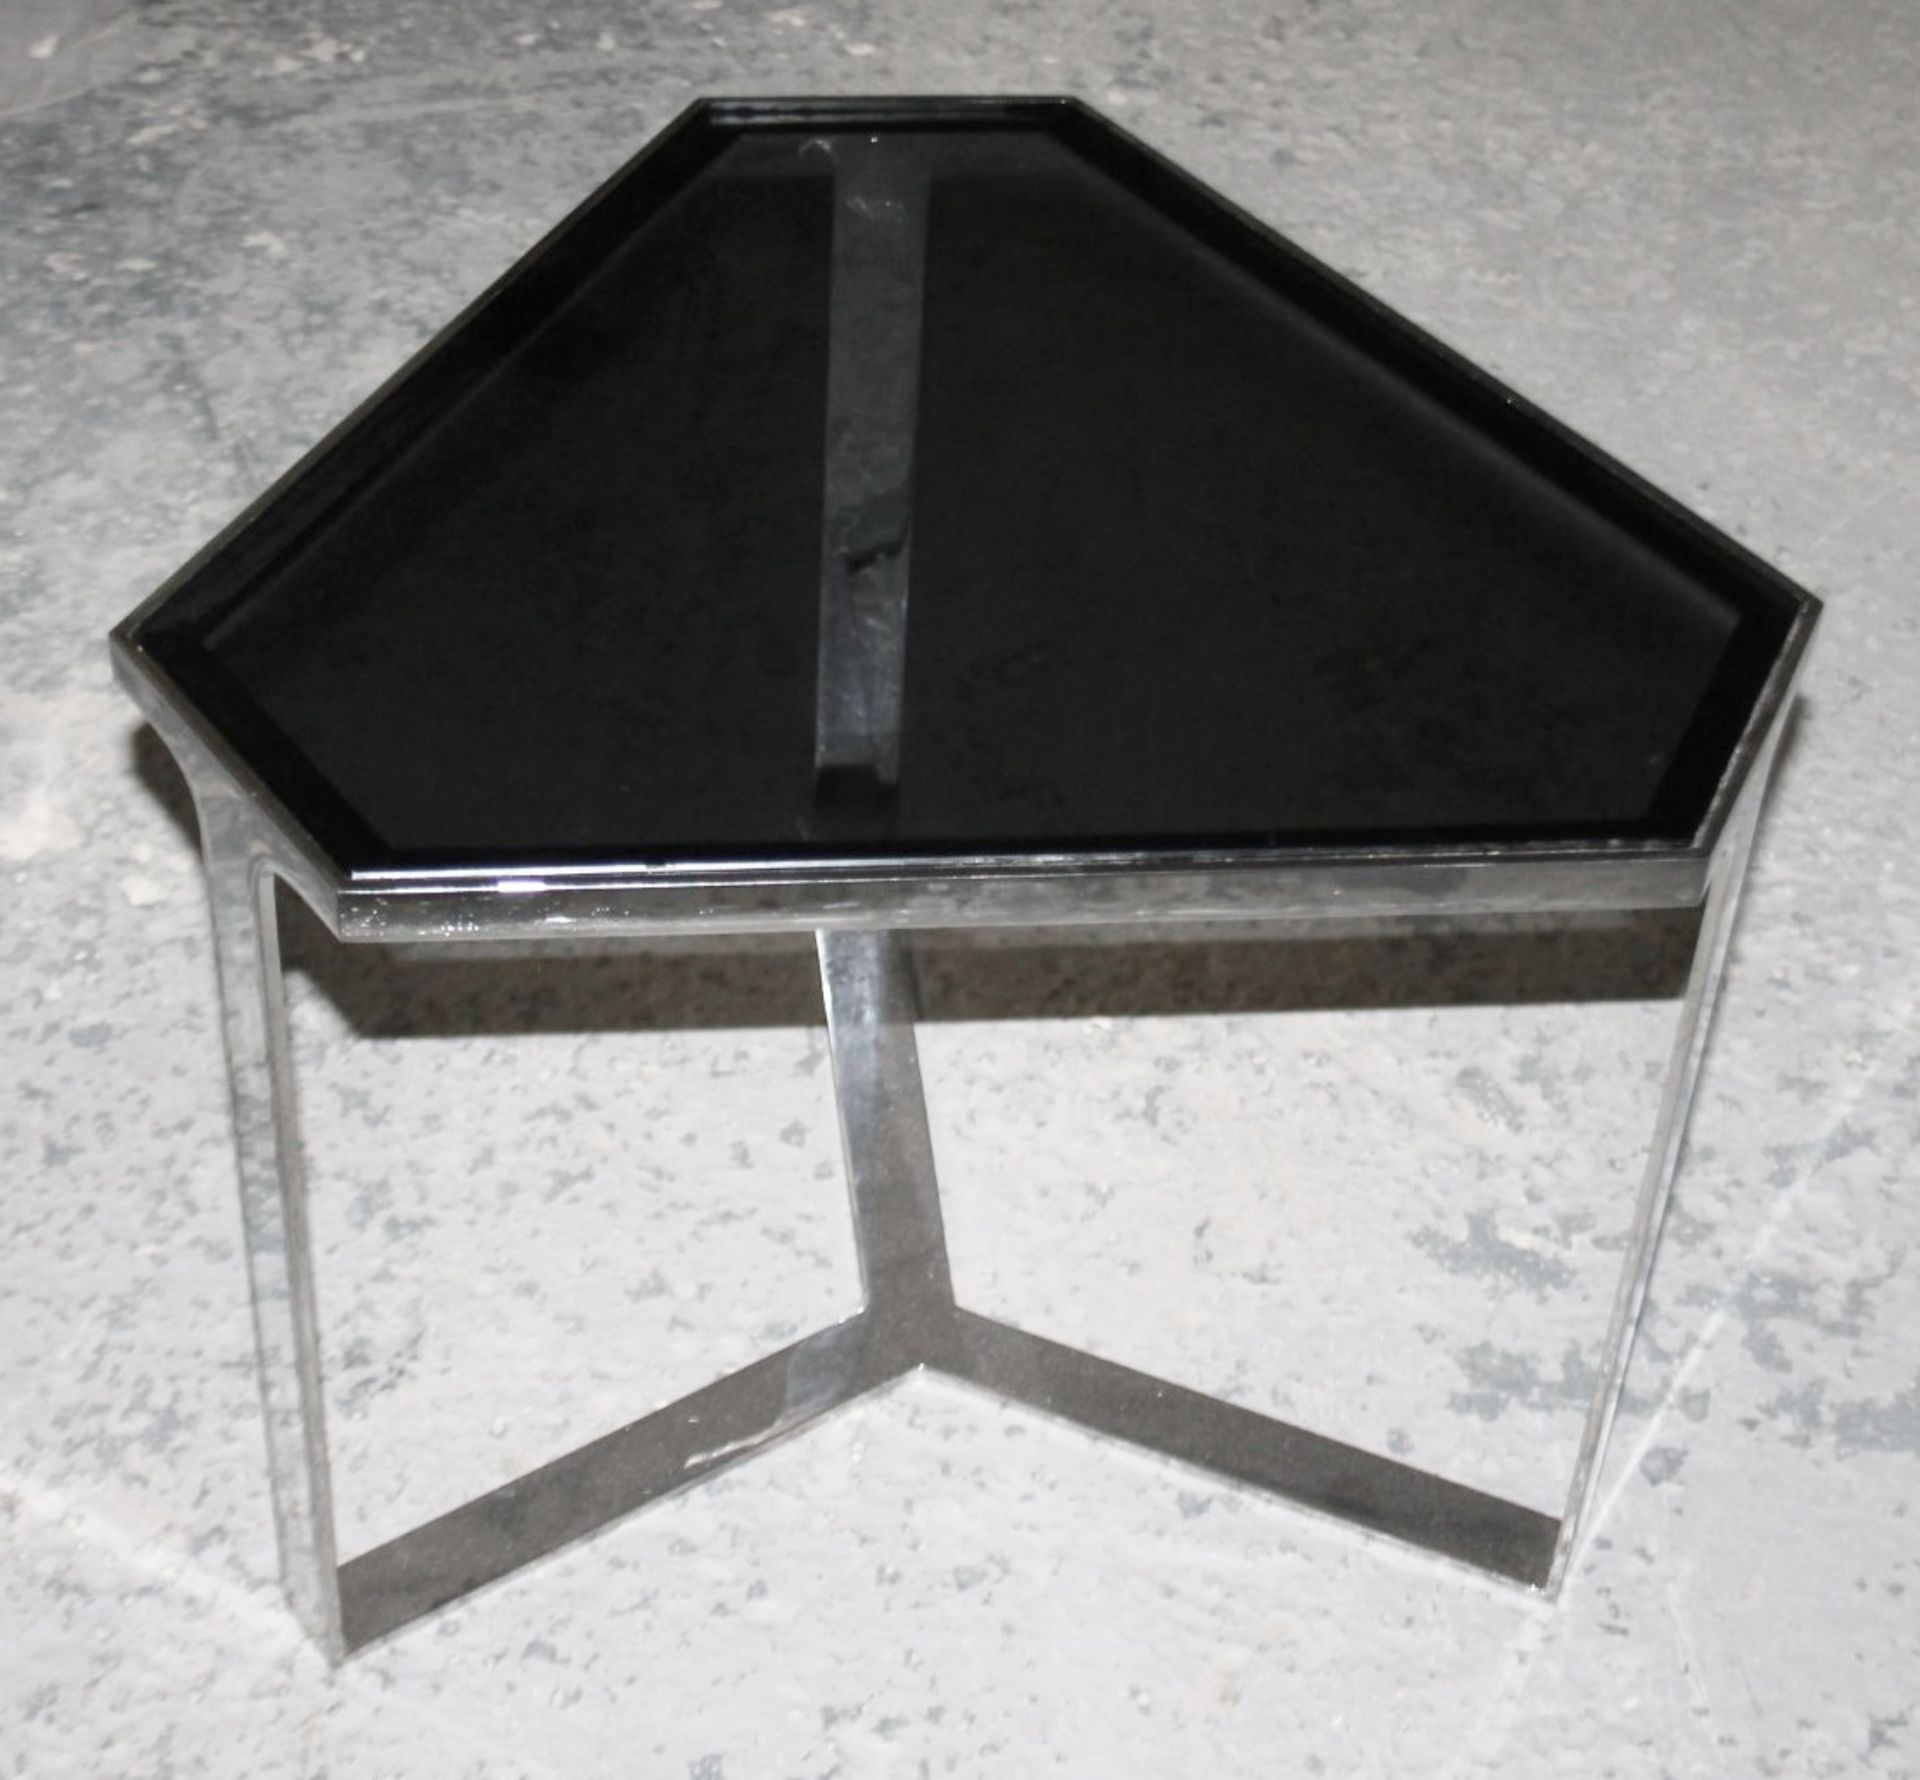 1 x Designer 5-Section Geometric Coffee Table, With Tinted Glass Tops and Chromed Bases - Image 2 of 6